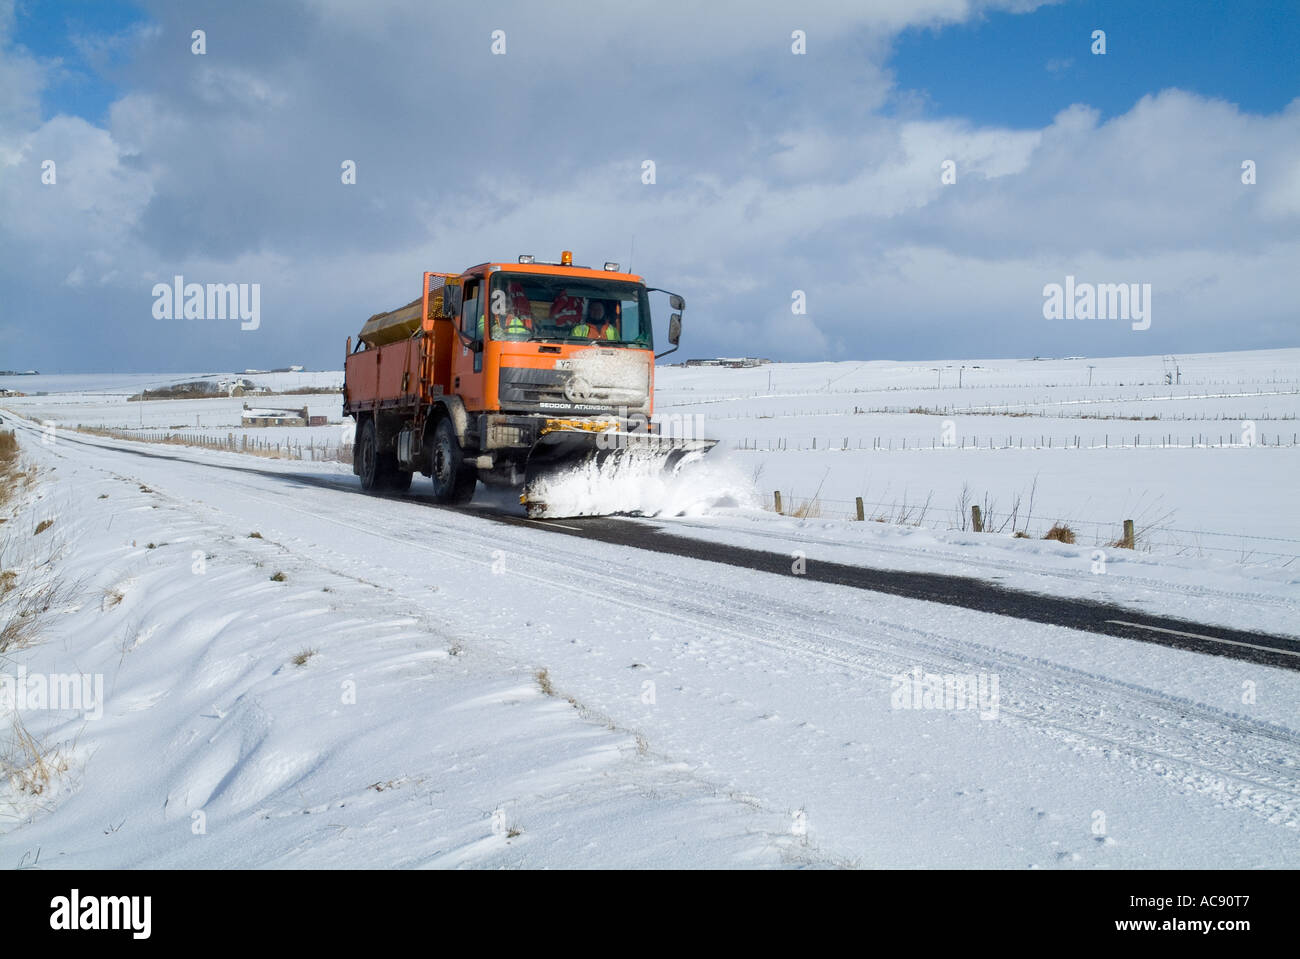 dh Snowplough ROADS UK OIC council snow plough clearing from roads Orkney Scotland gritting road gritter spreading grit Stock Photo